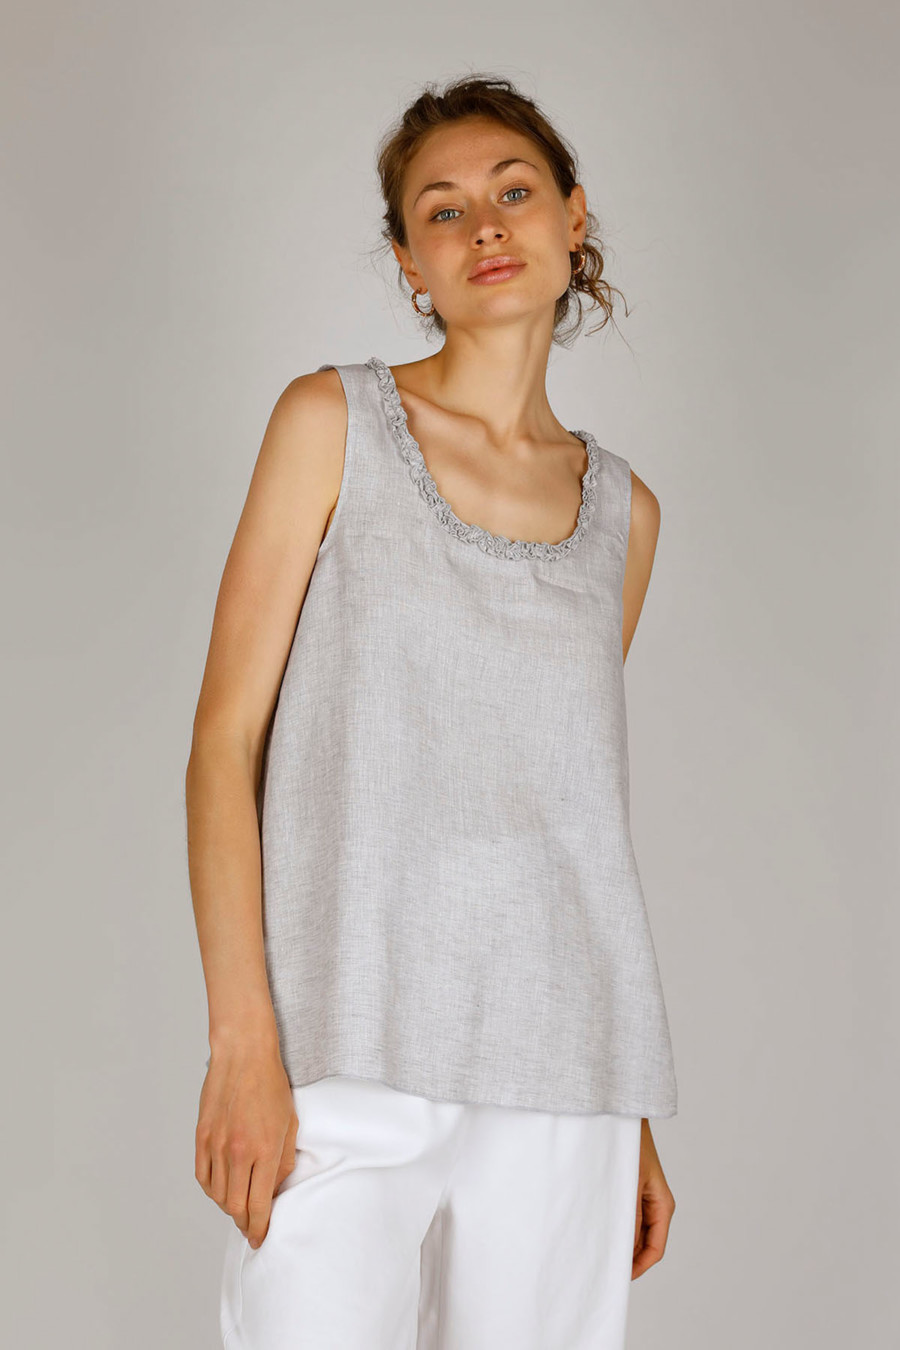 POLLY - Strappy top with ruffle details - Colour: Silver